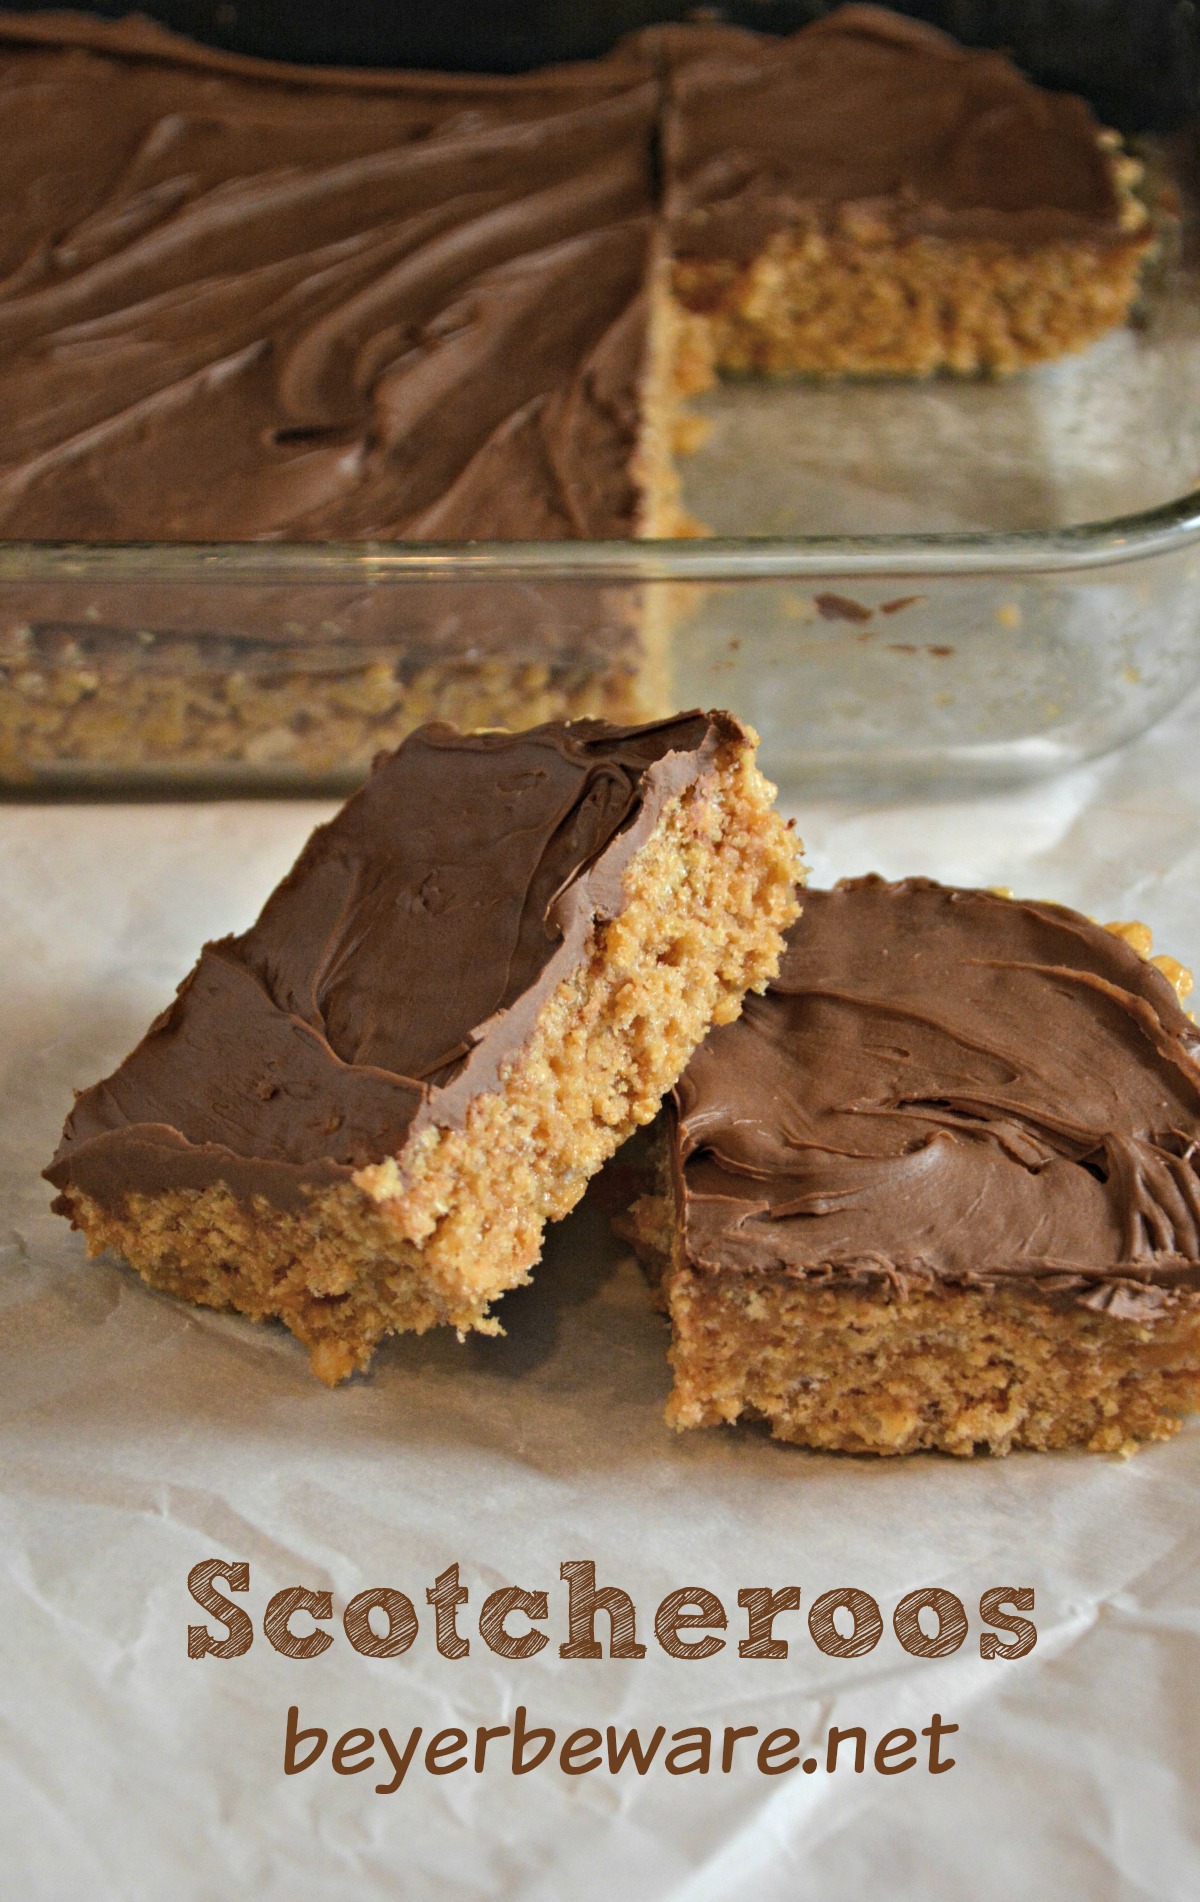 Scotcheroos are the peanut butter rice krispies treats everyone will crave. The no-bake peanut butter chocolate bars ready in under 15 minutes.